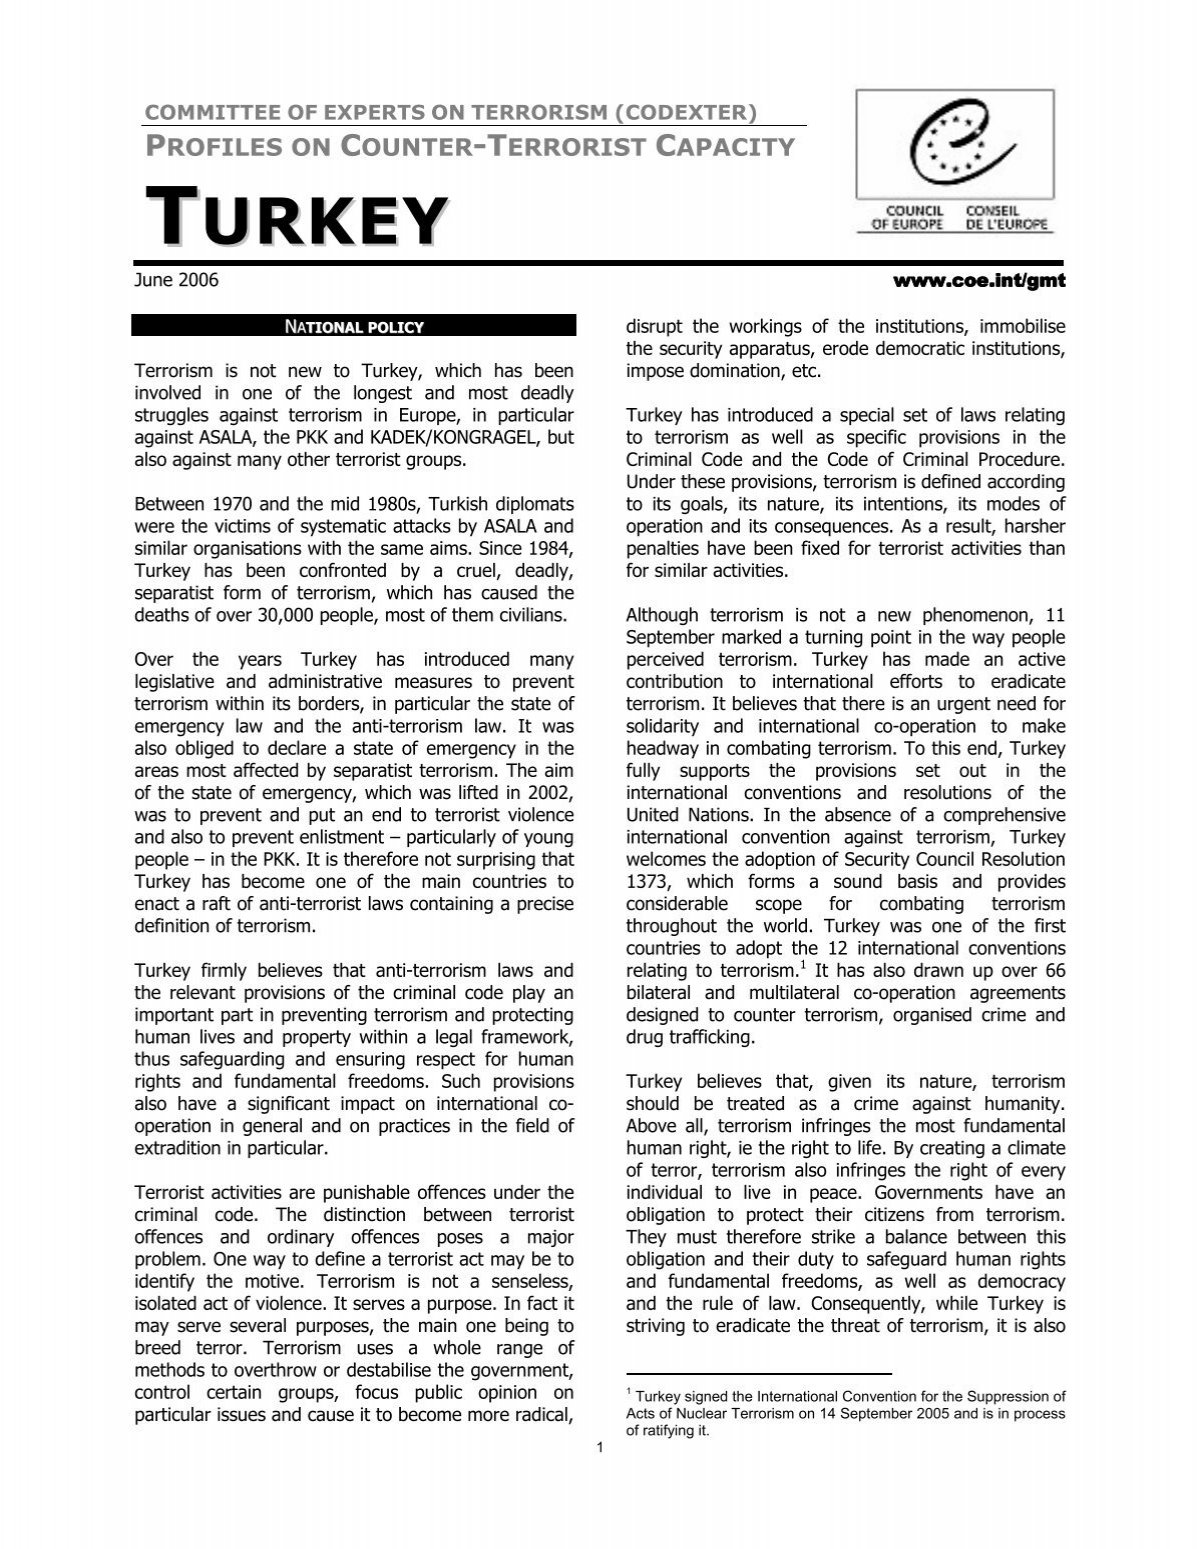 codexter-turkey-profile-on-counter-council-of-europe